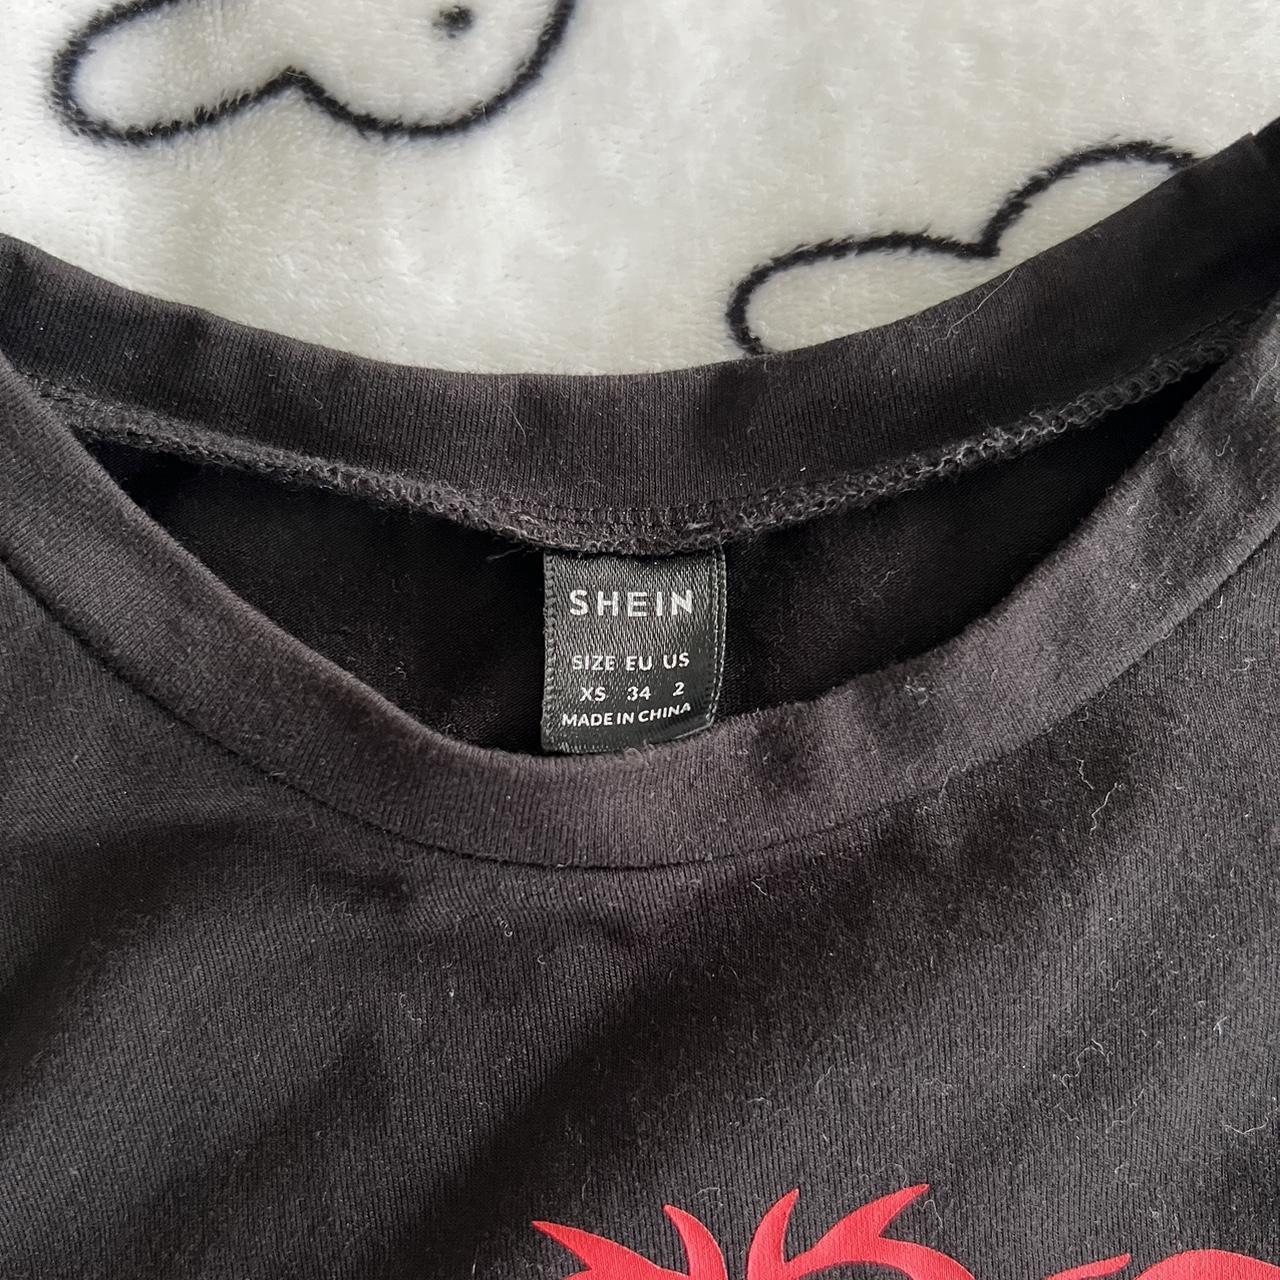 shein black and red heart baby tee size... - Depop